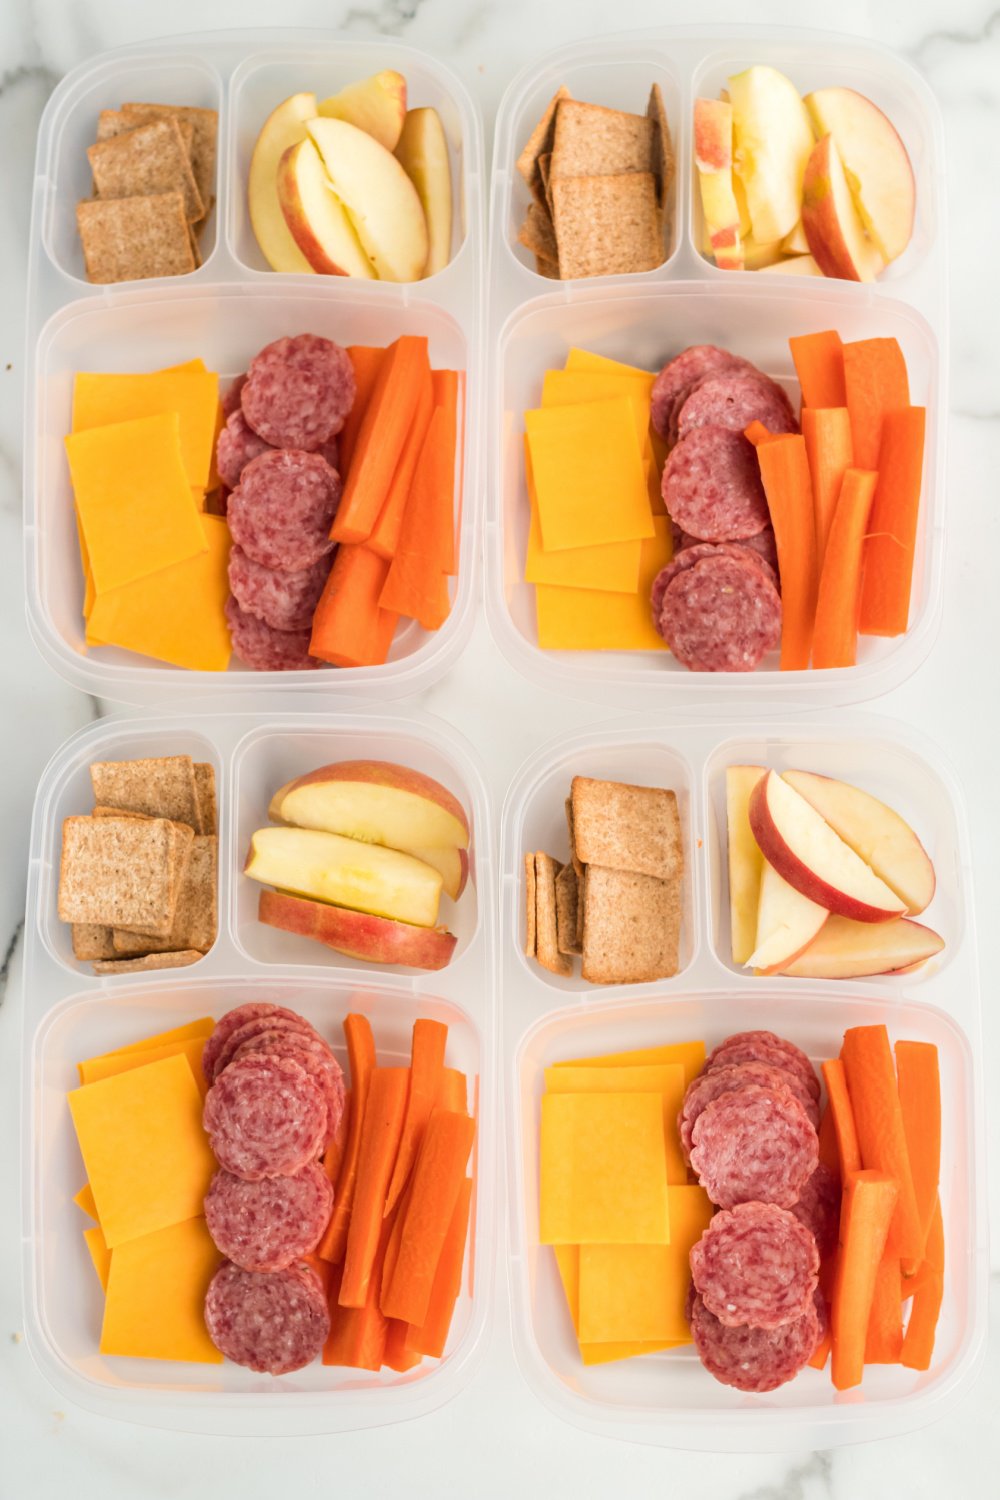 This Salami Cheese and Cracker Lunchbox Idea is full of crackers, cheese, and salami to give a protein boost to keep you full all day. via @familyfresh